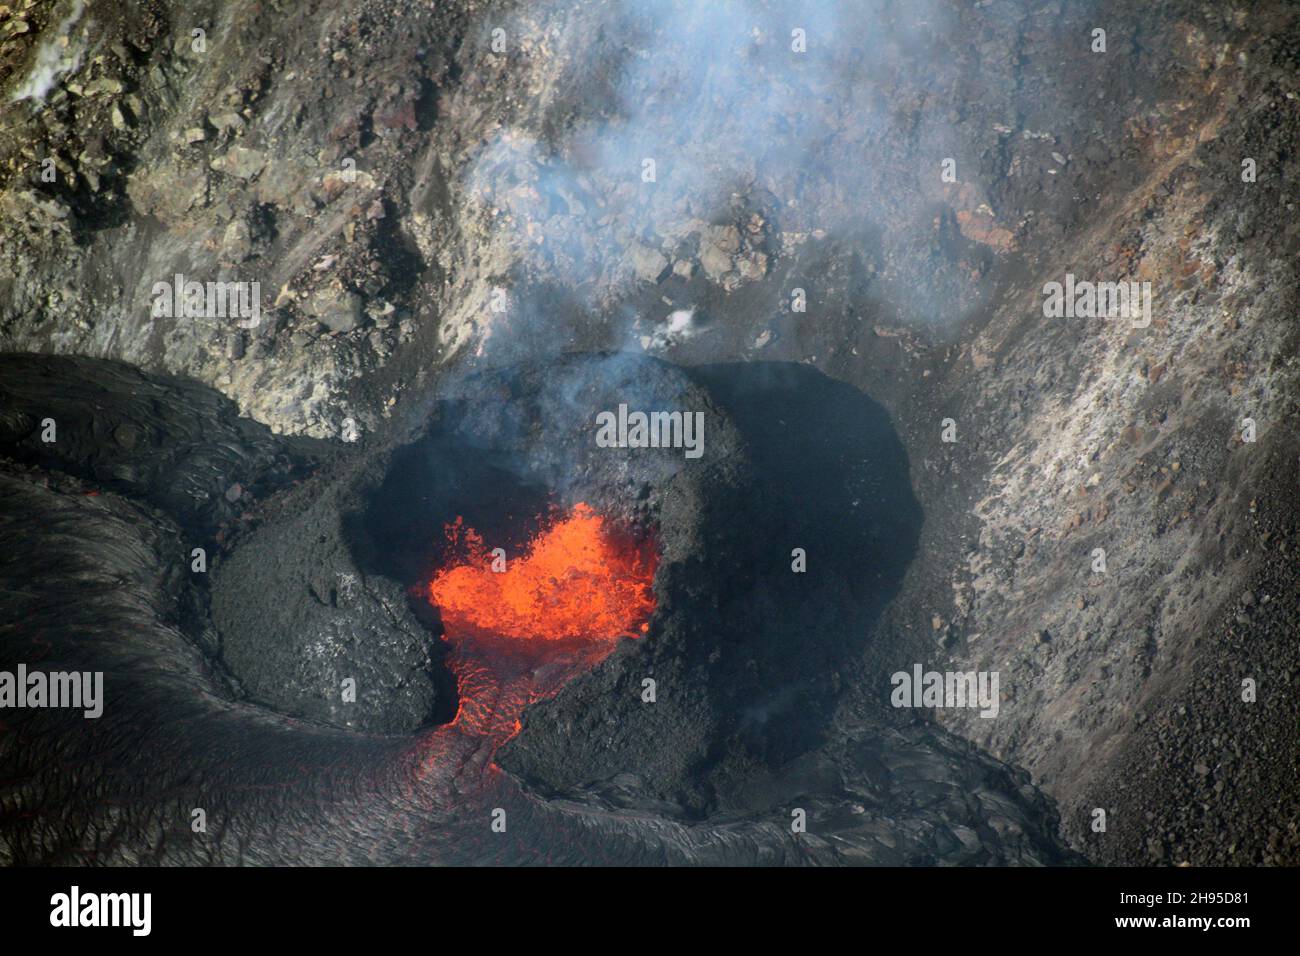 Kapoho, United States of America. 15 October, 2021. A view of the west vent during the eruption within Halemaumau, at Kilauea summit within Hawaii Volcanoes National Park, October 15, 2021 in Kapok, Hawaii. Lava fountaining at multiple fissure locations on the base and west wall of the crater continued, and a lava lake is growing within the volcanic crater.  Credit: Natalia Deligne/USGS/Alamy Live News Stock Photo